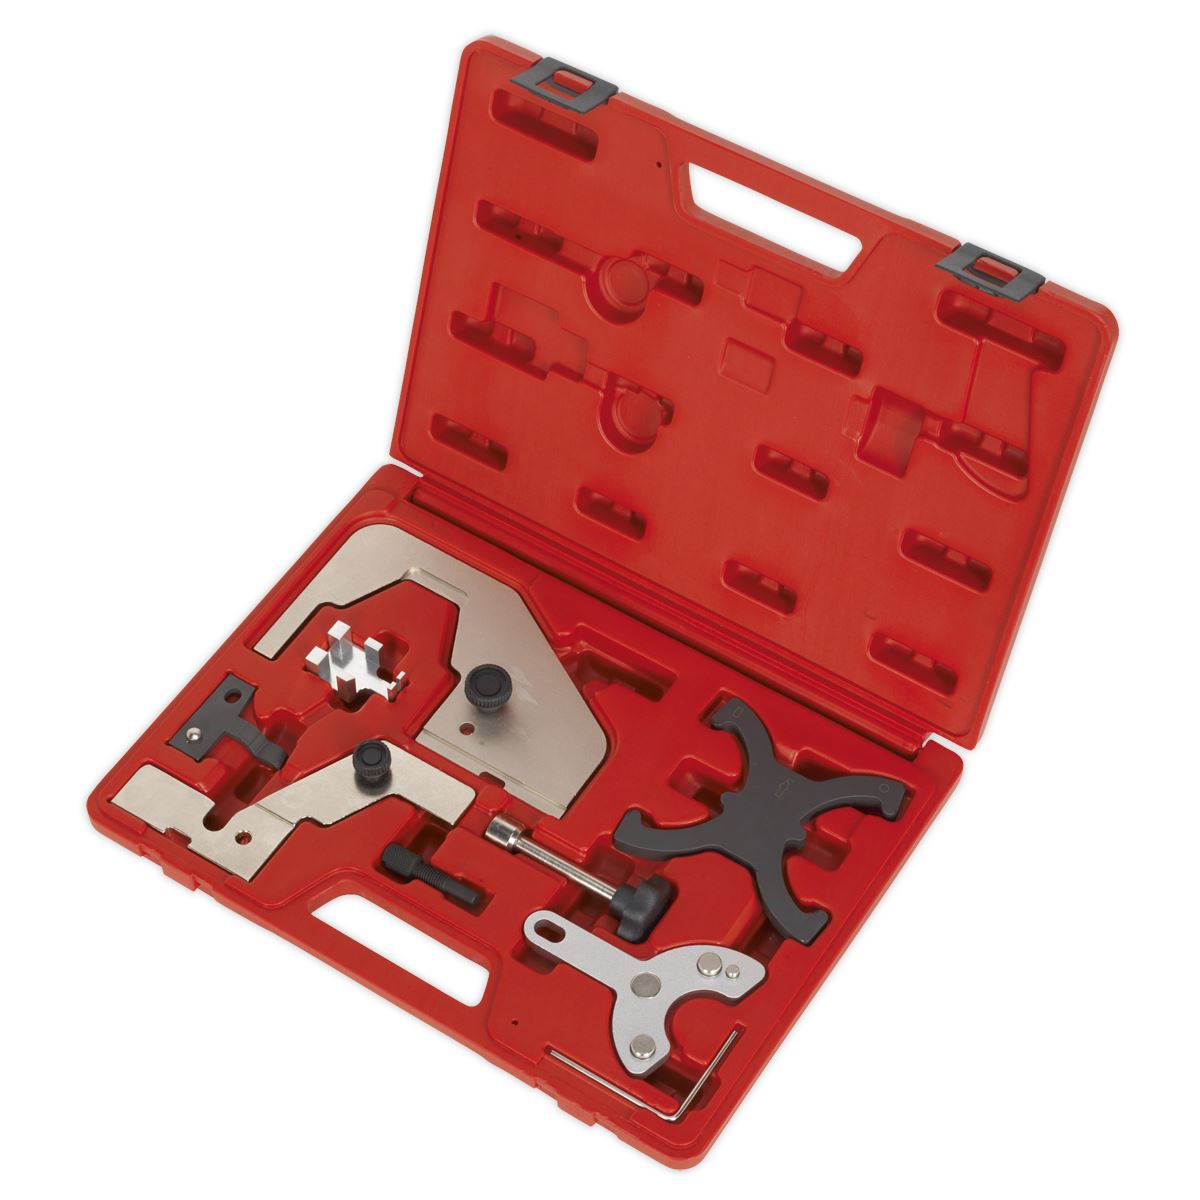 Sealey Petrol Engine Timing Tool Kit - for Ford, Volvo, Mazda 1.5, 1.6, 2.0 - Belt/Chain Drive